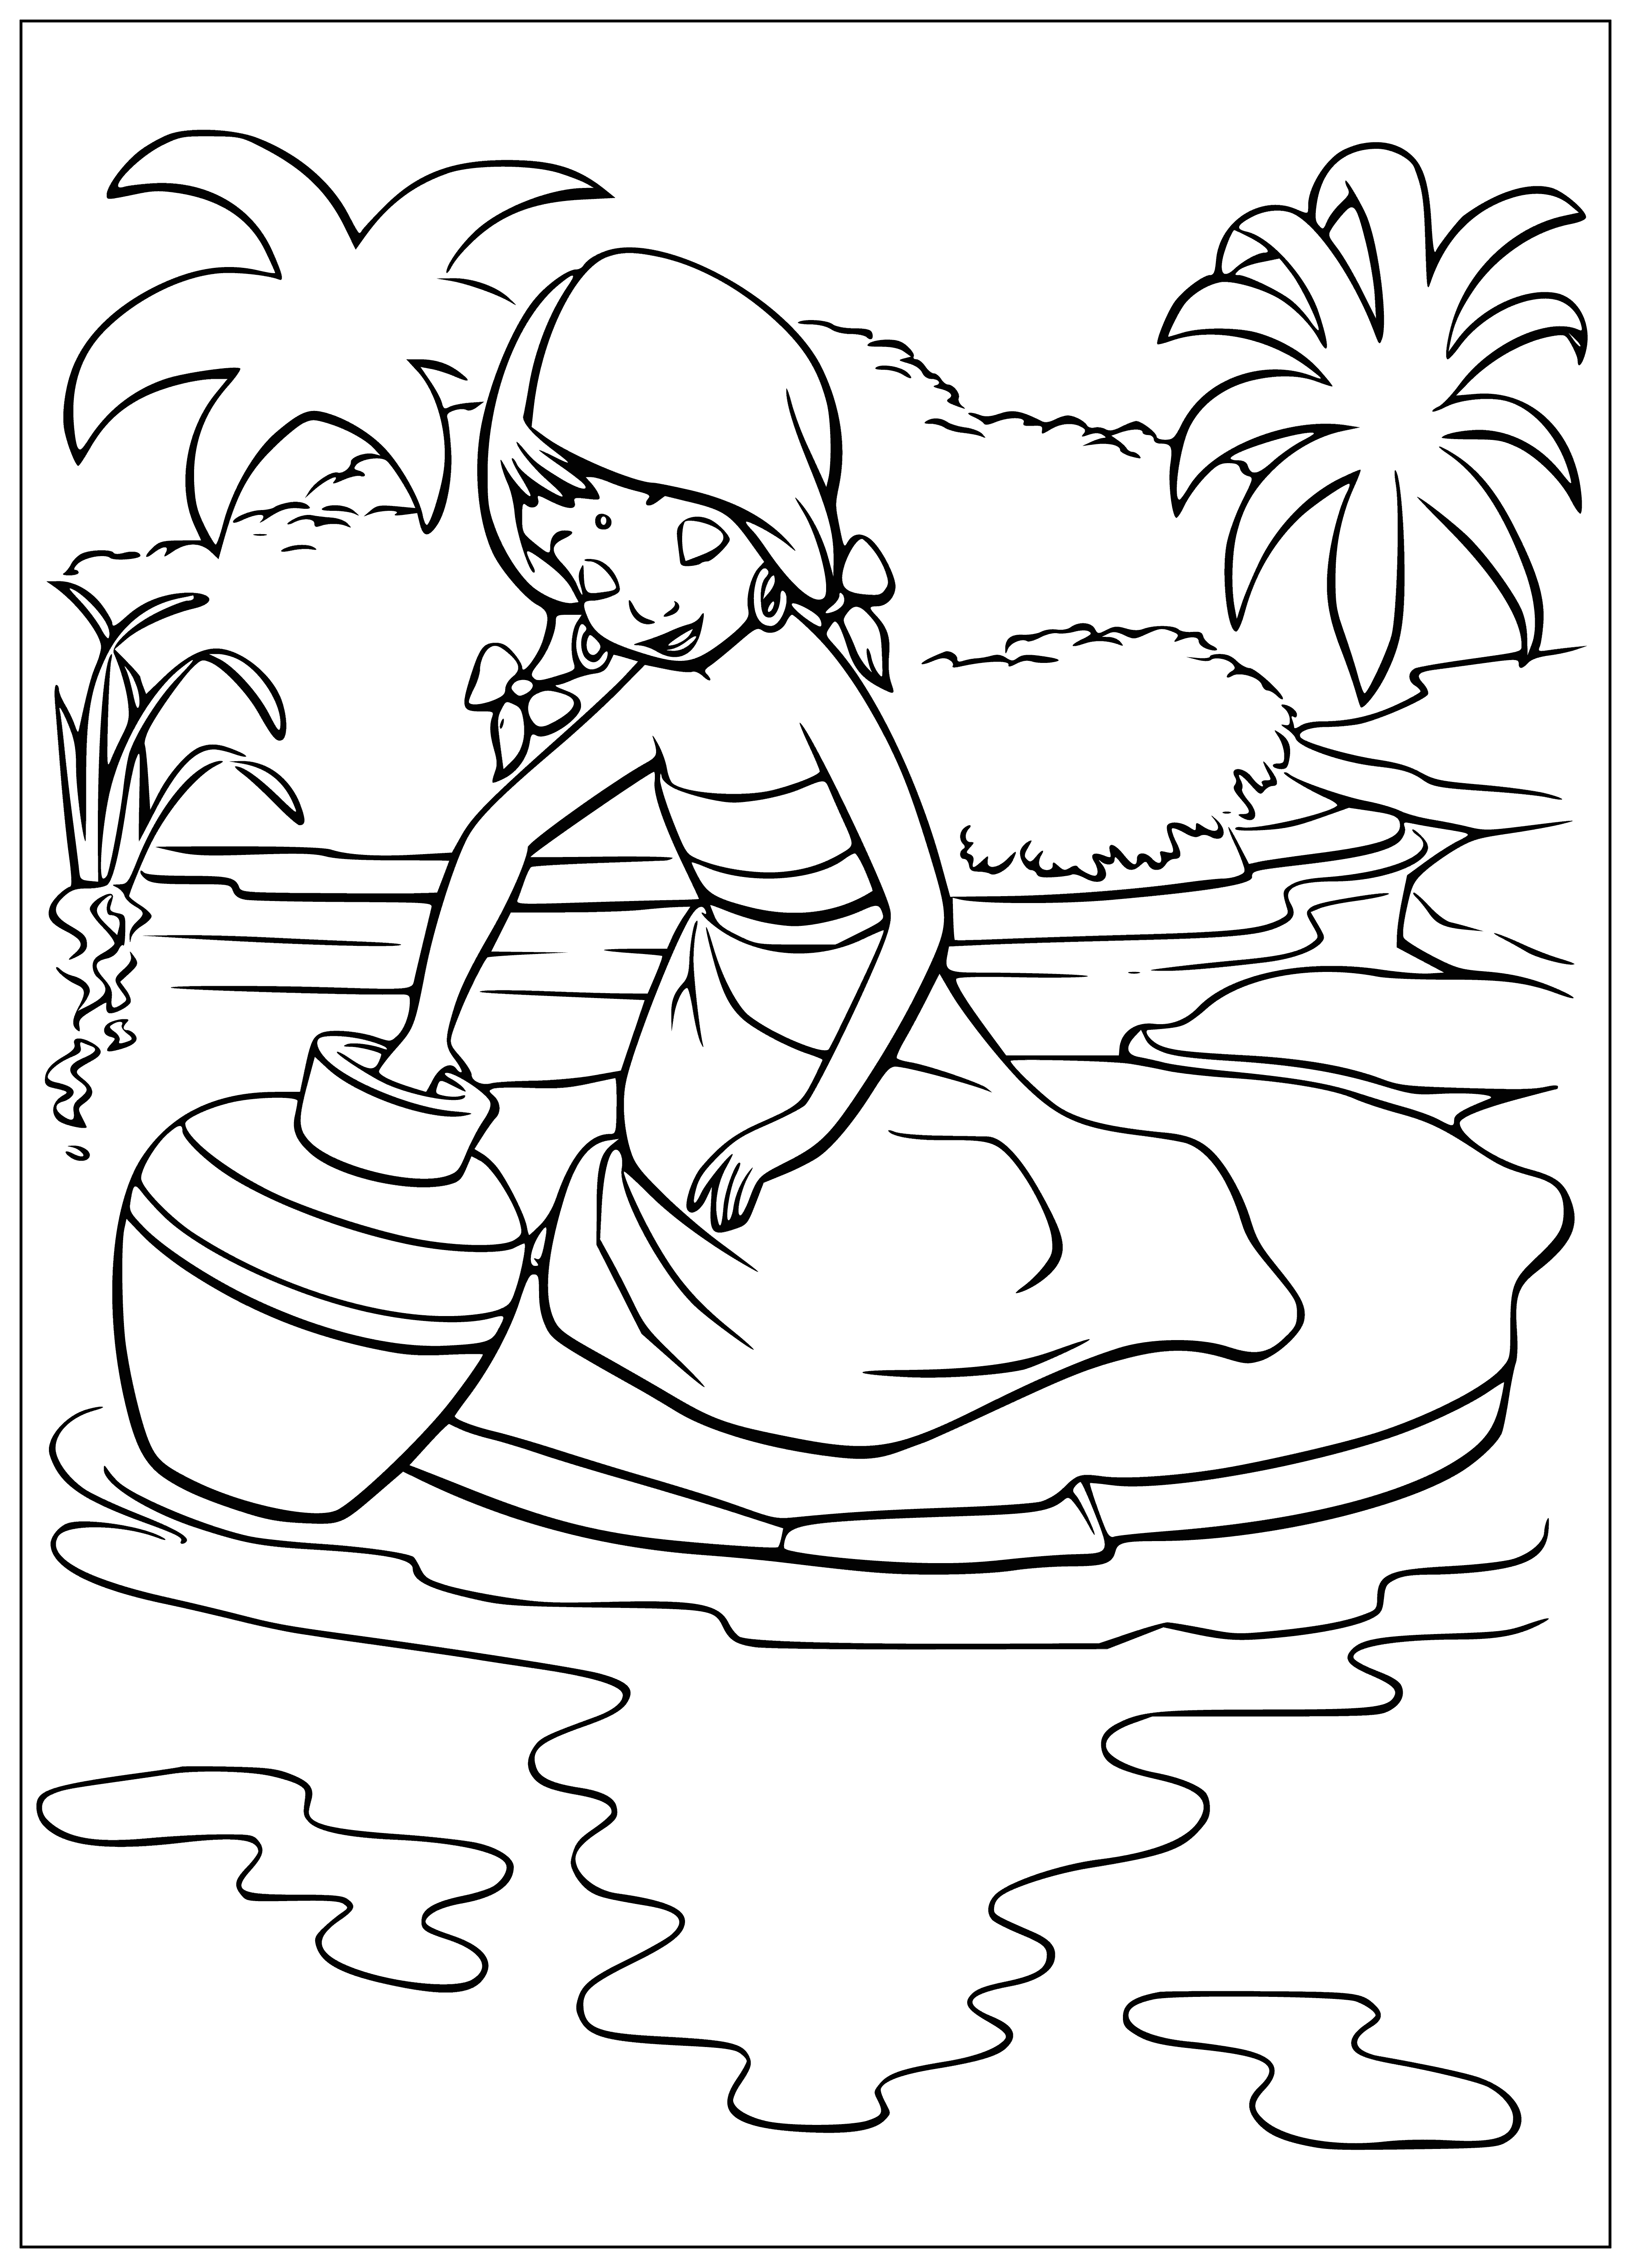 coloring page: A light green snake coils in the water, eyes closed, tongue sticking out.